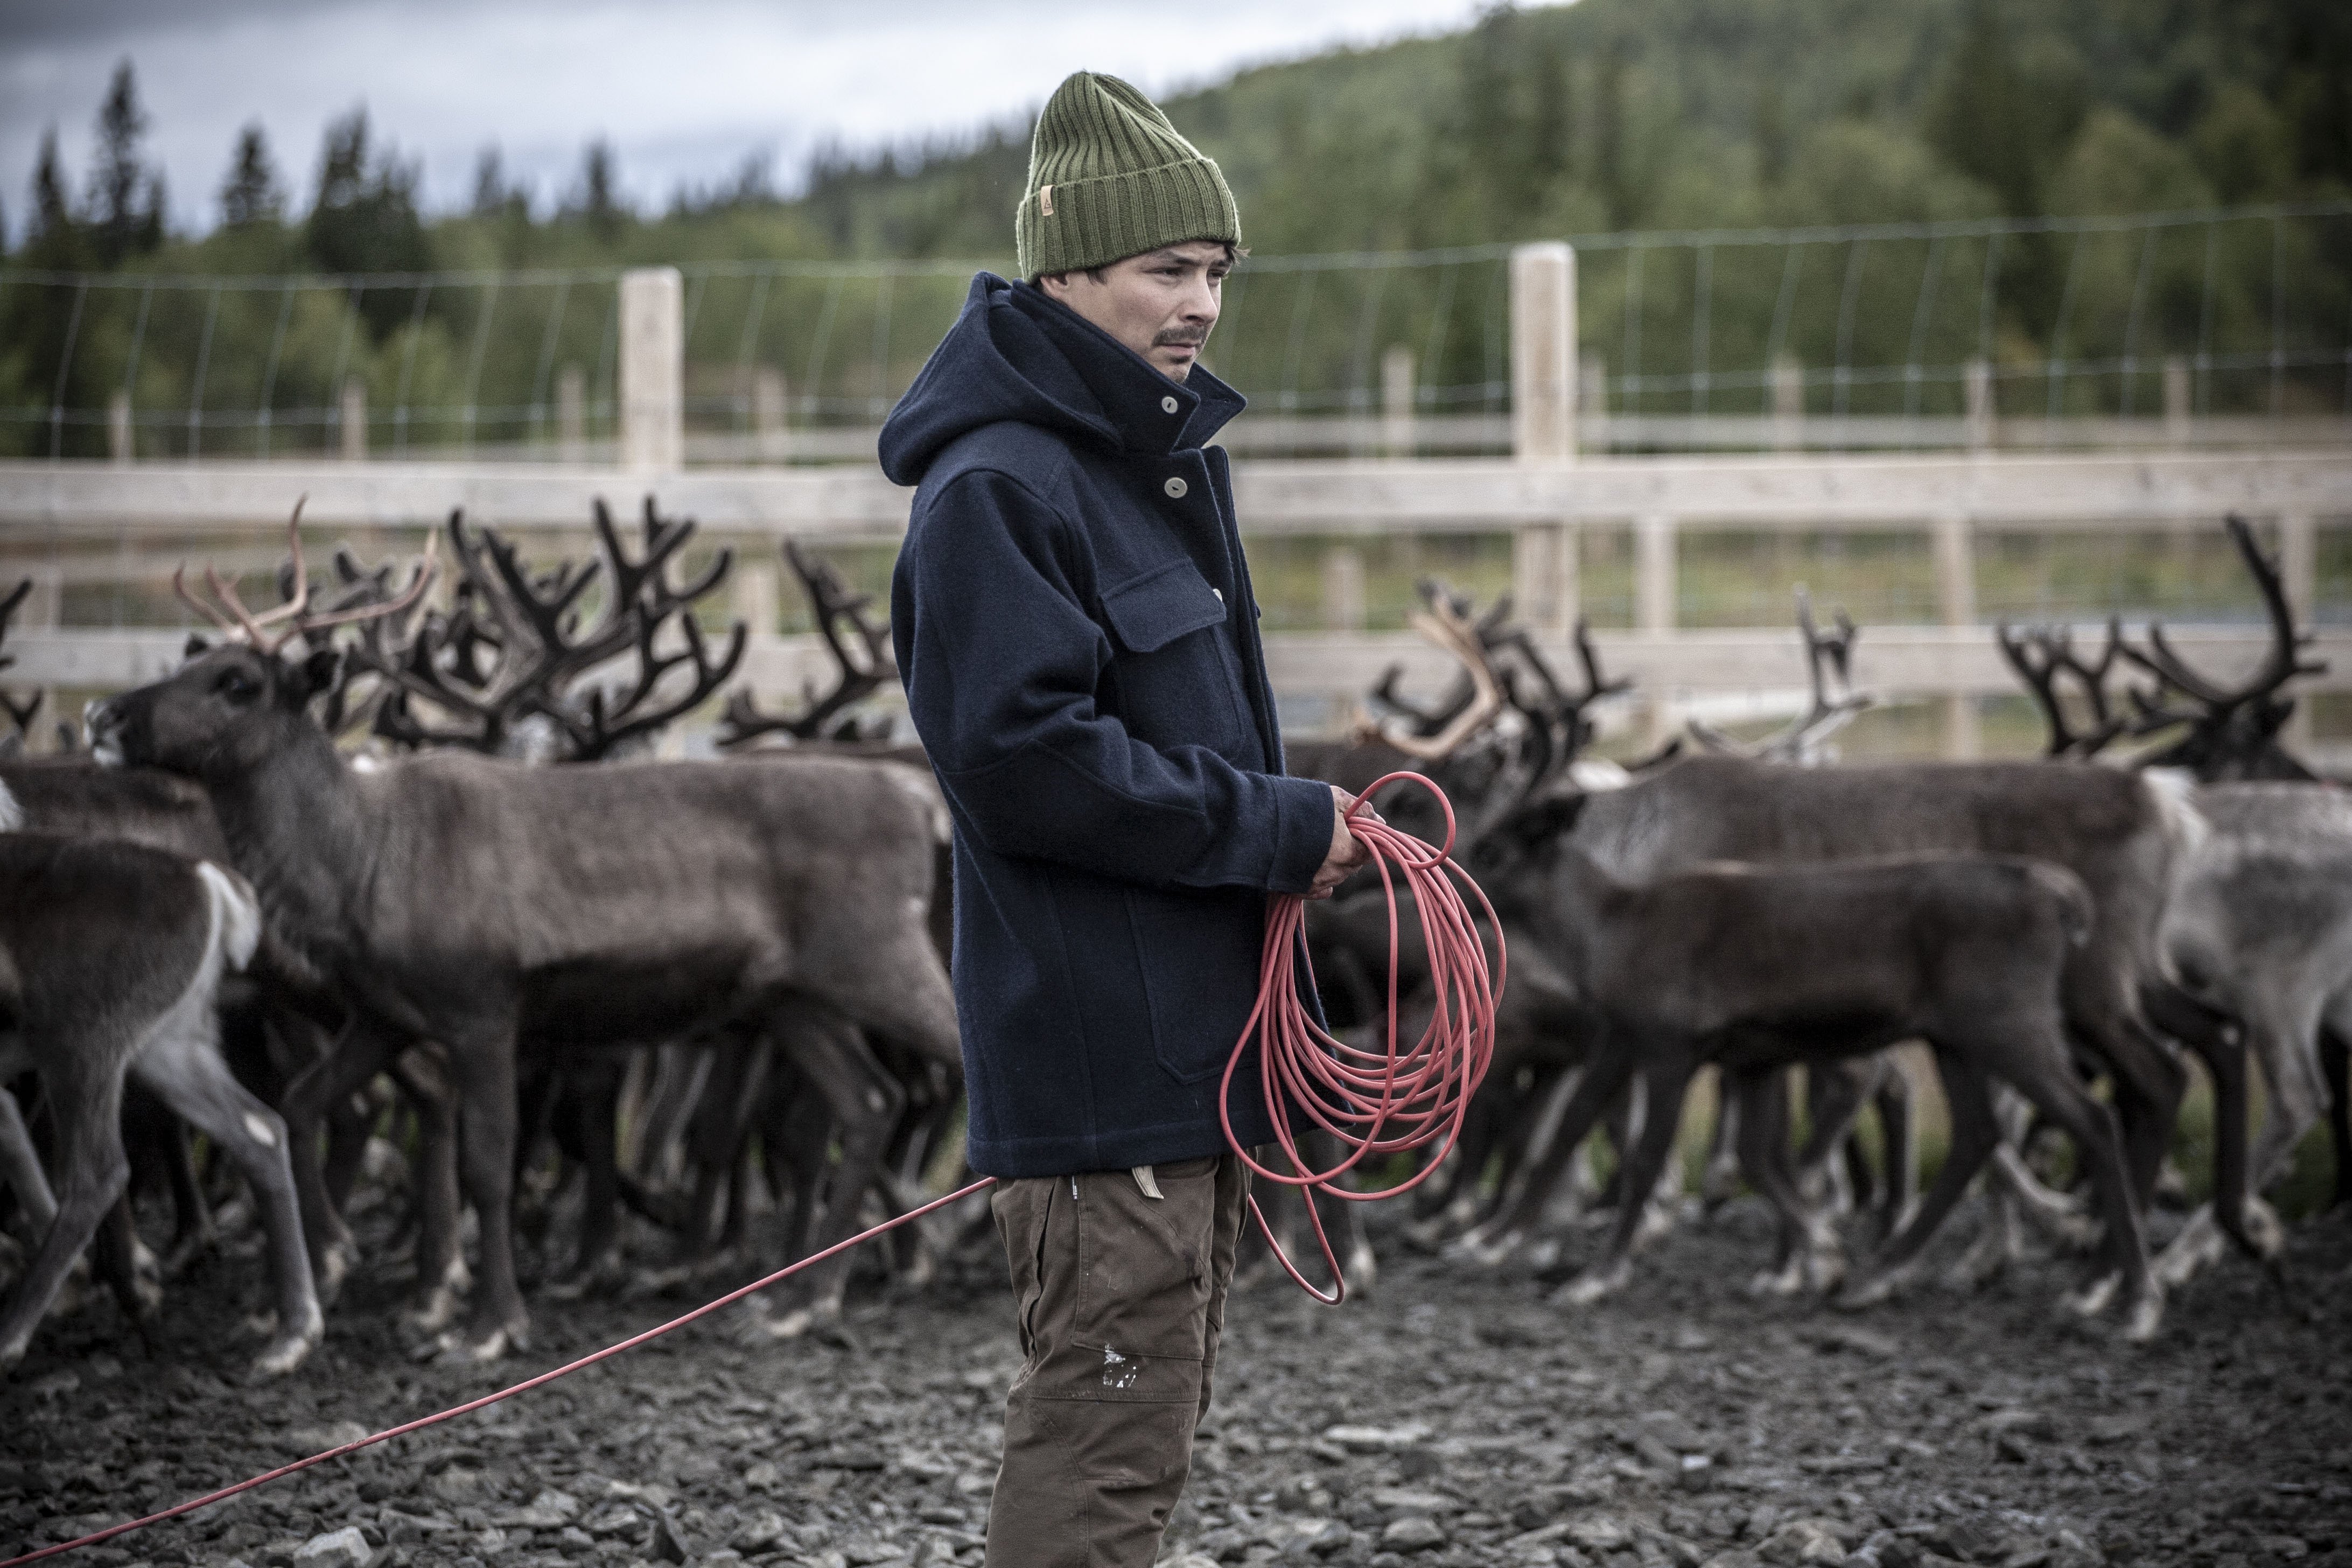 Keeping the Sámi traditions alive